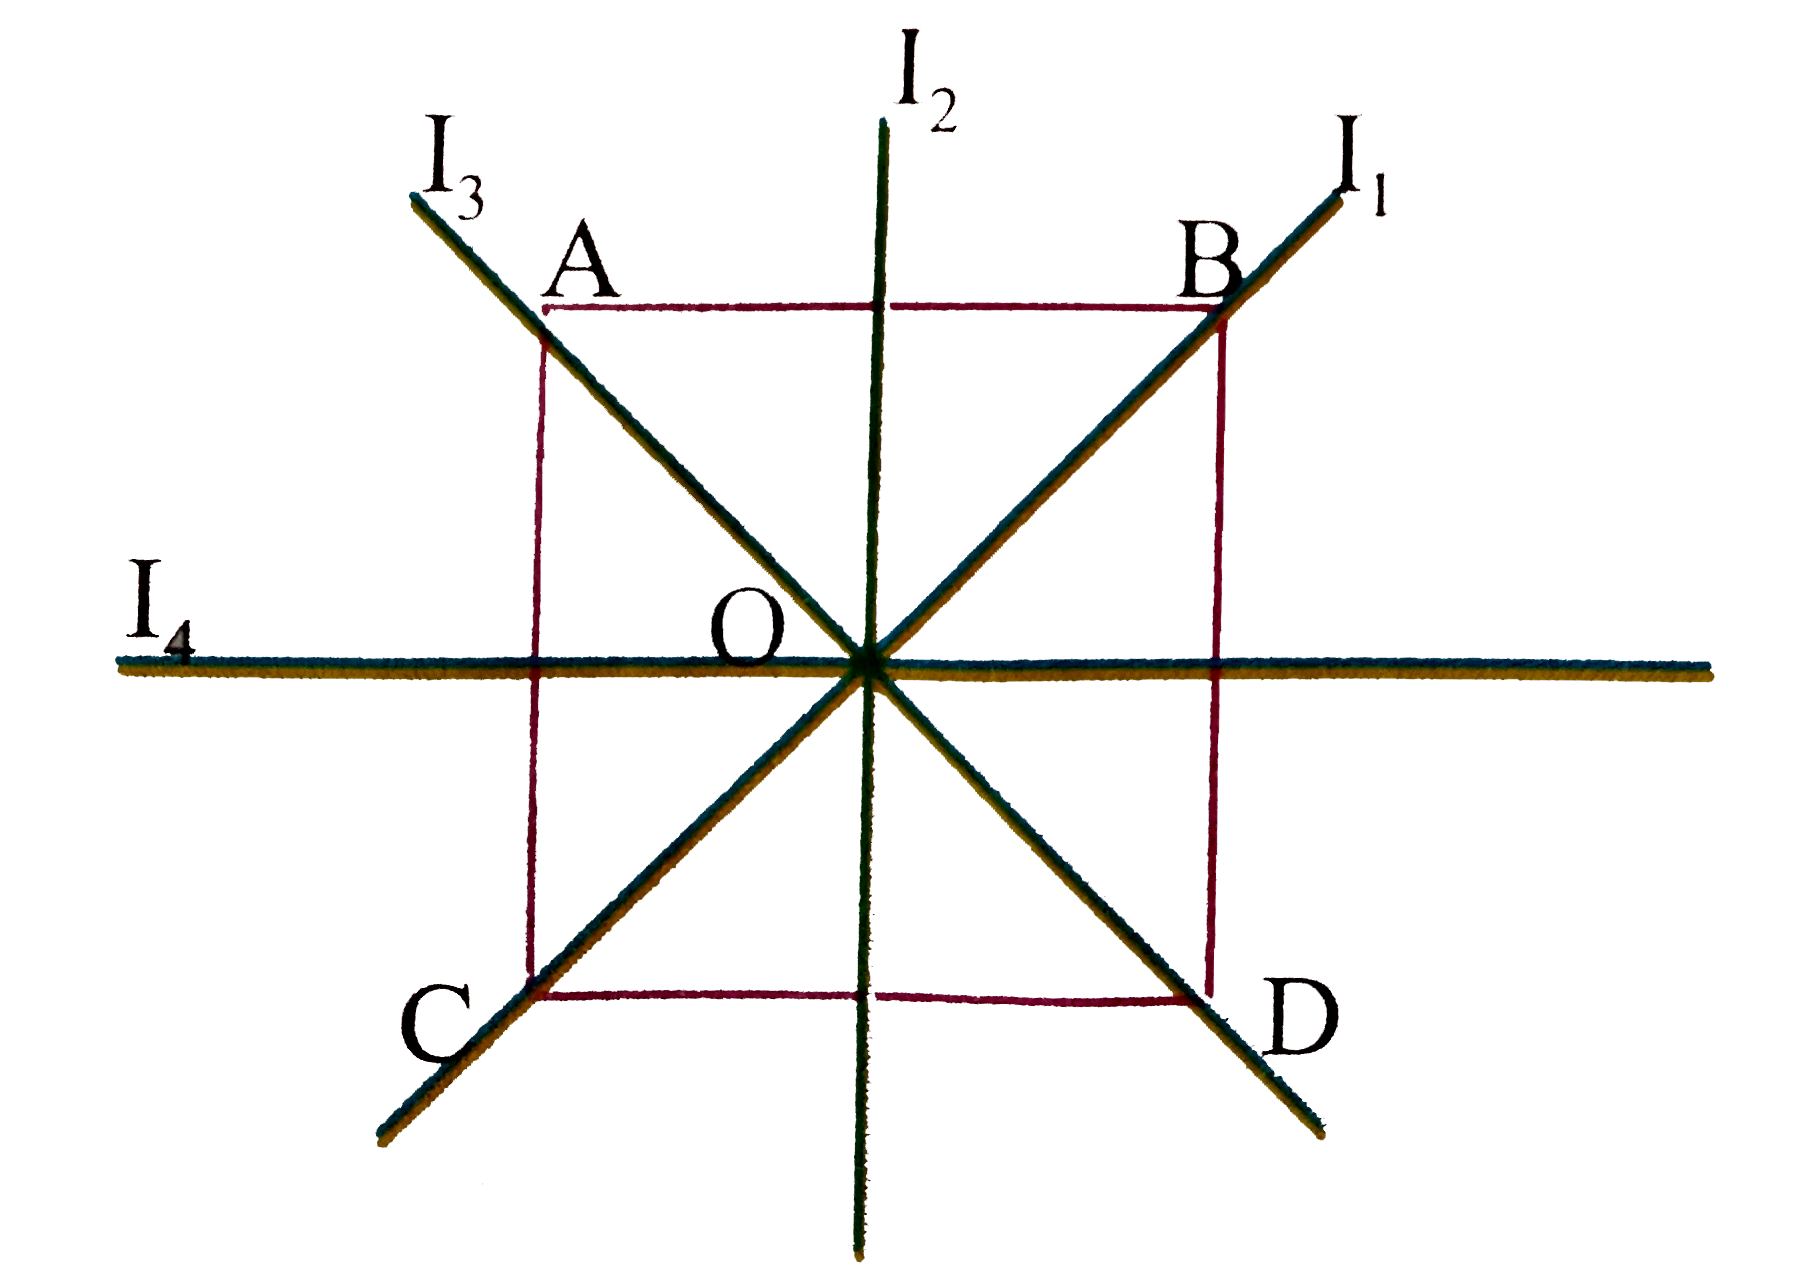 The moment of inertia of a thin square plate ABCD of uniform thickness about an axis passing through the centre O and perpendicular to the plane of the plate is      (a) I(1)+I(2), (b) I(2)+I(4)   2I(1)+I(3), (d) I(1)+2I(3)